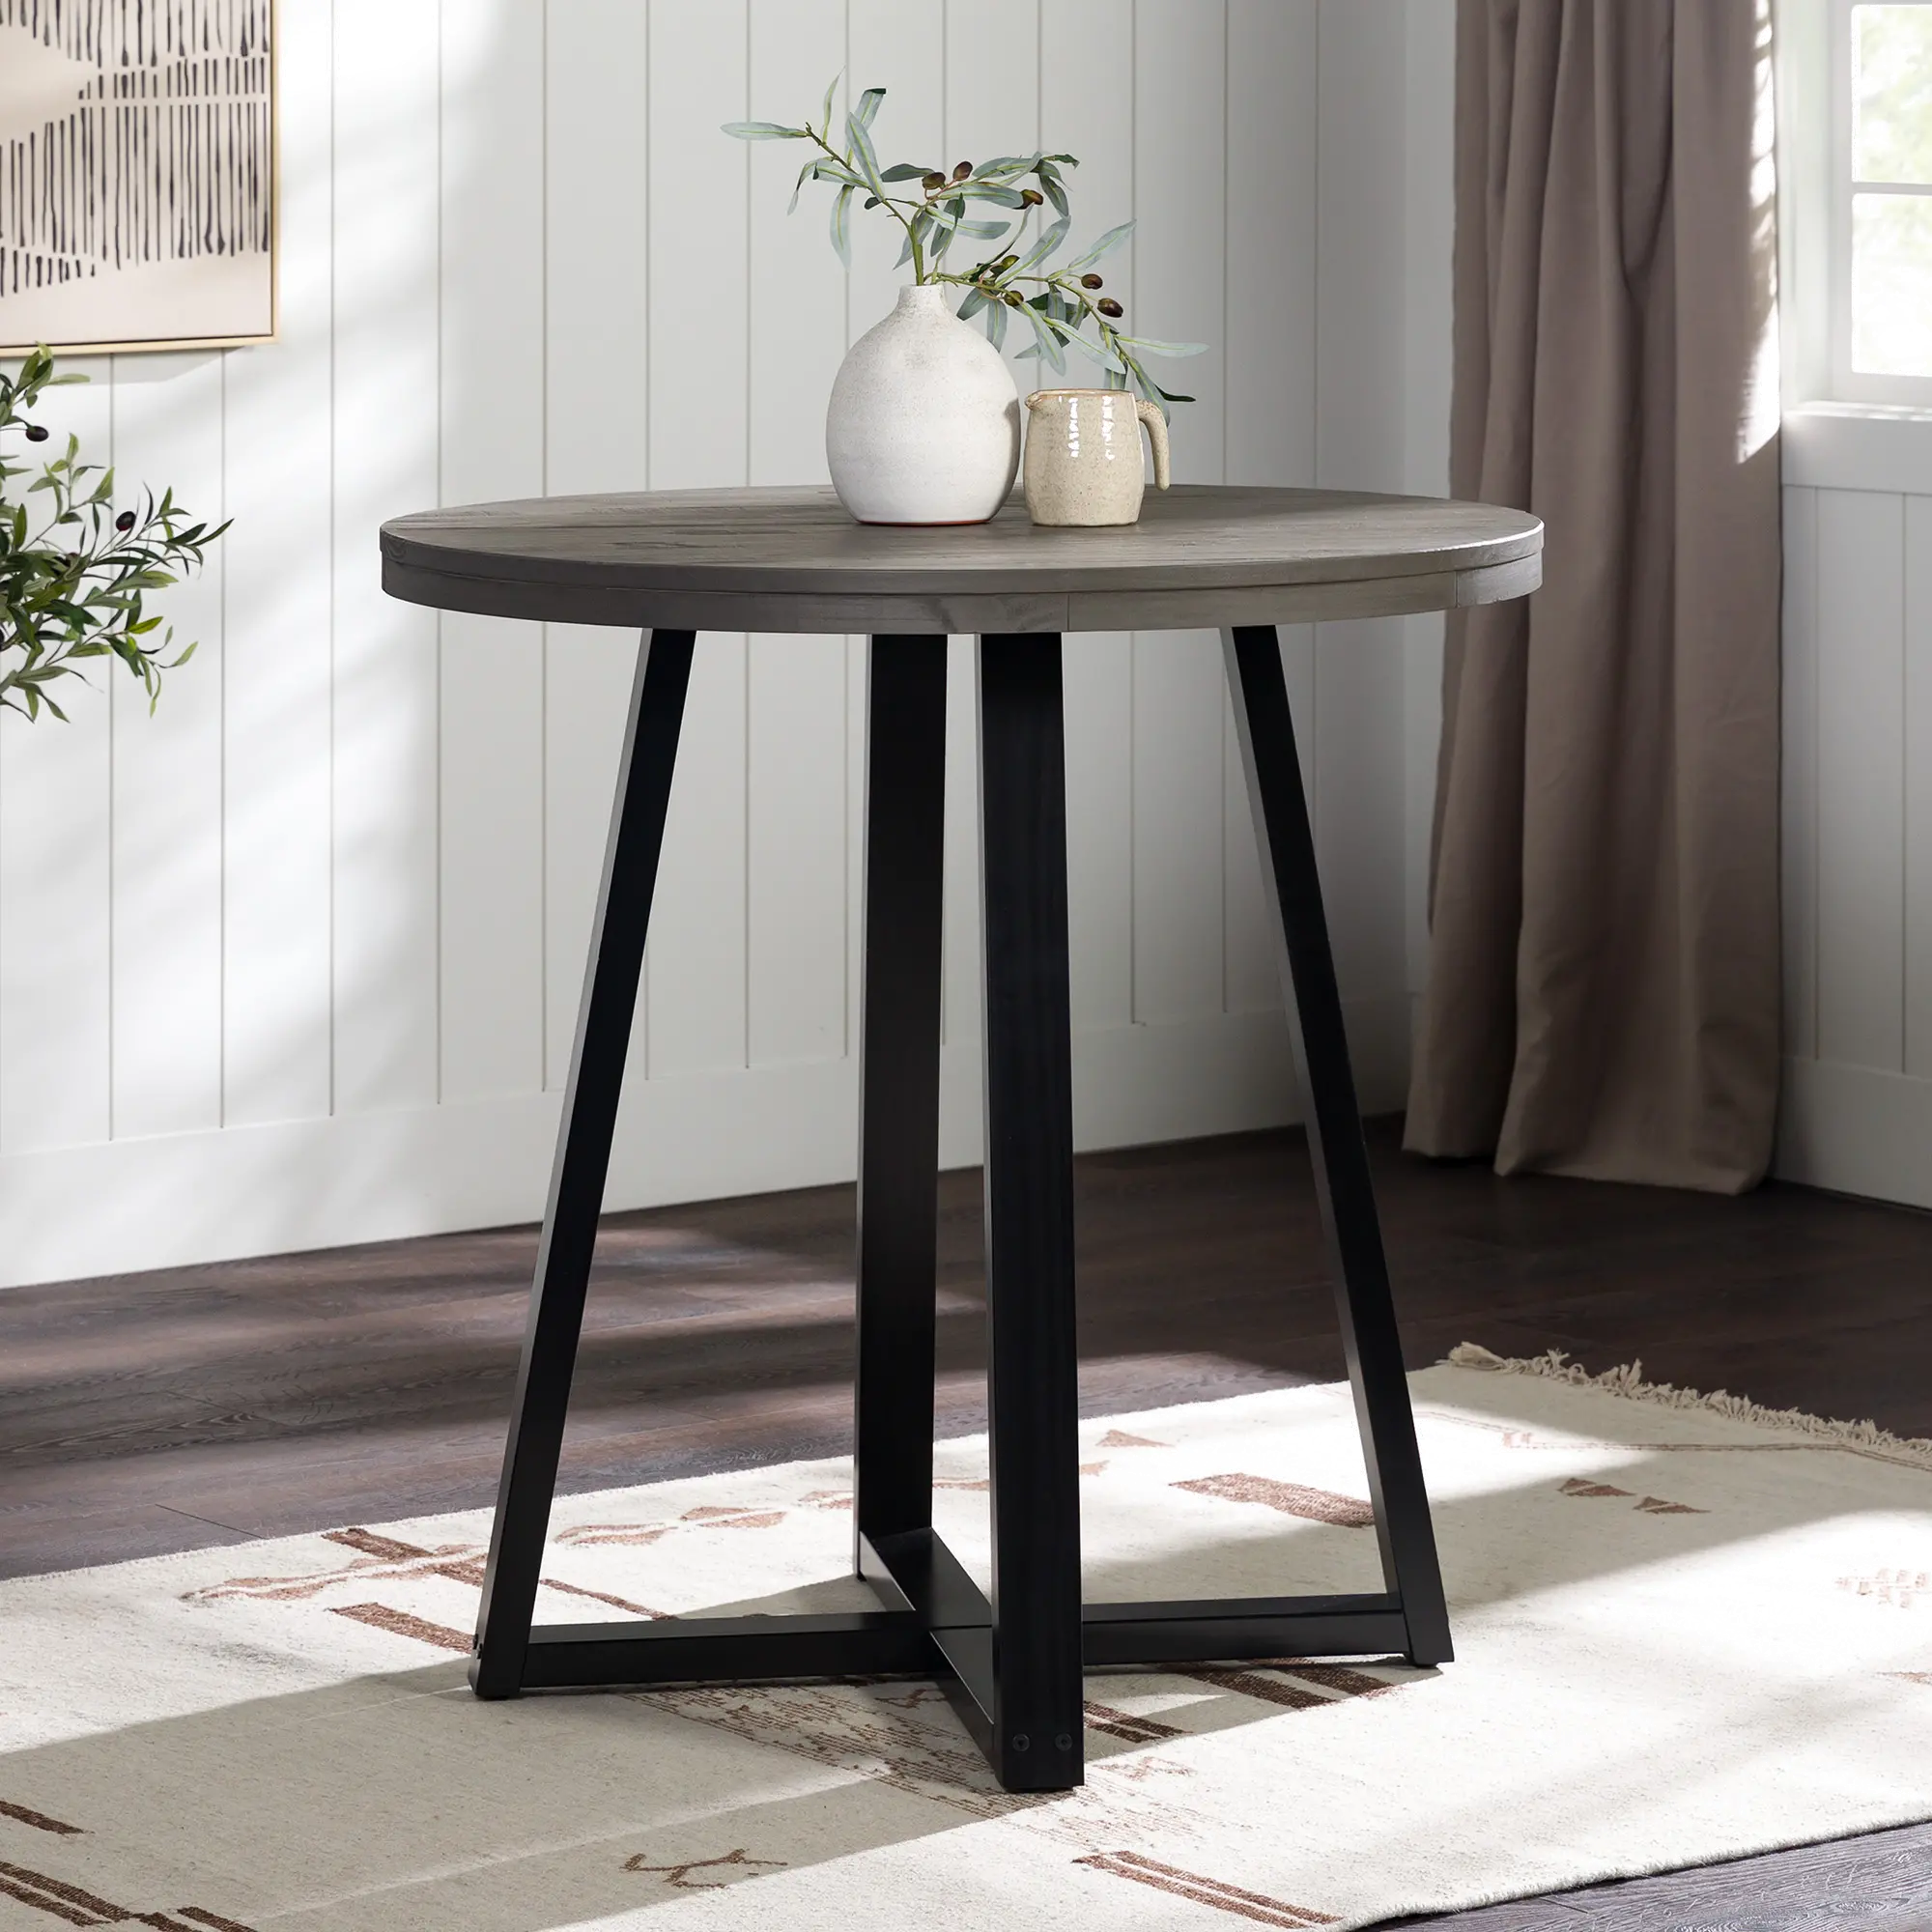 Durango 36 Distressed Gray Round Counter Height Table